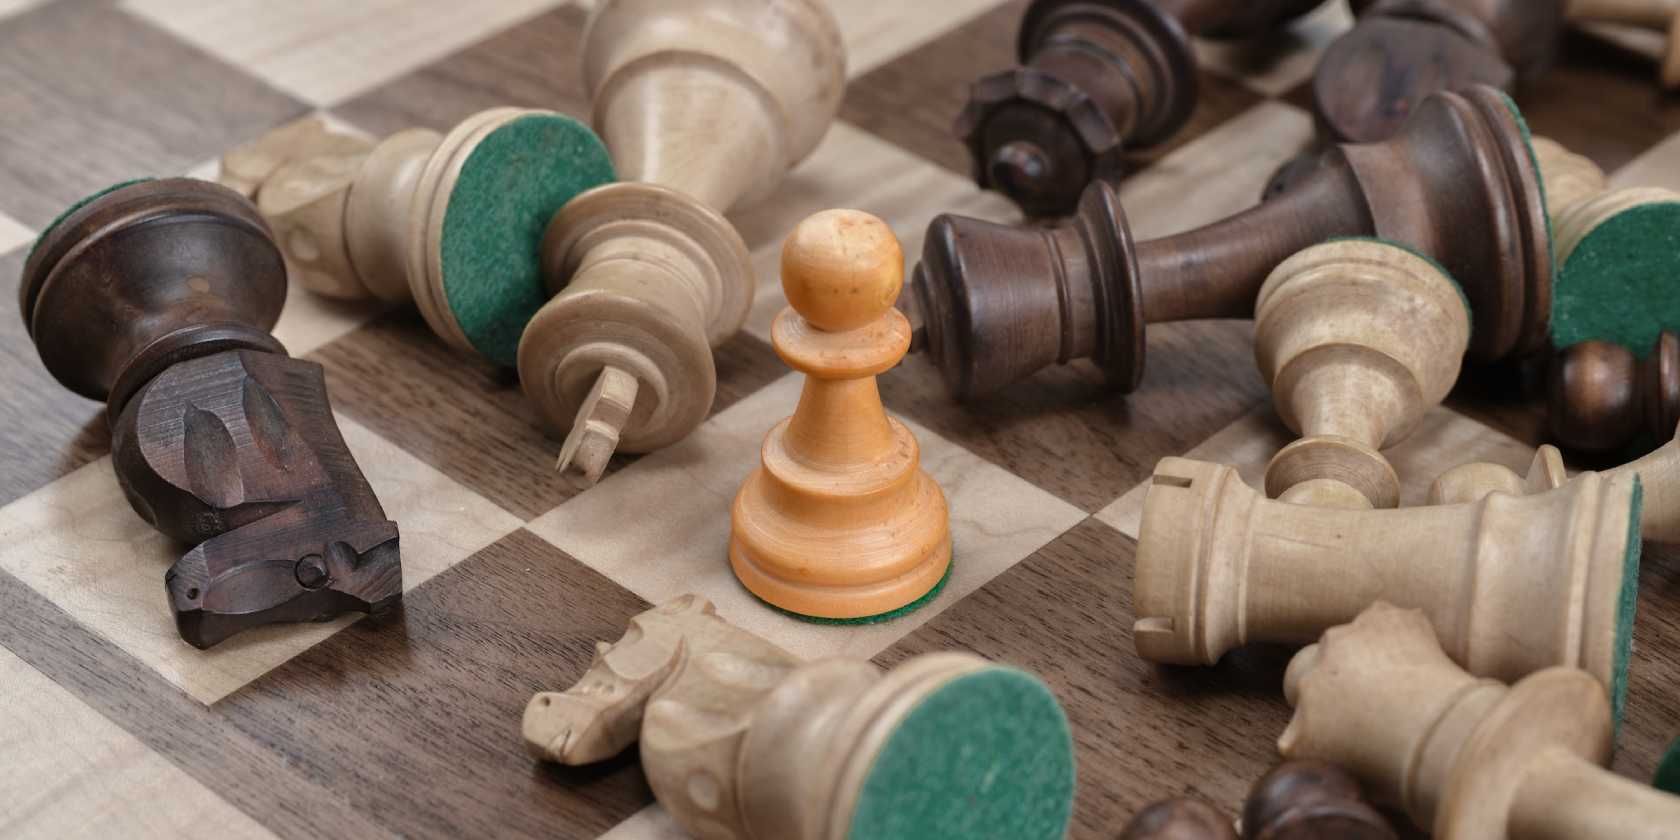 Play Chess Variants Online 